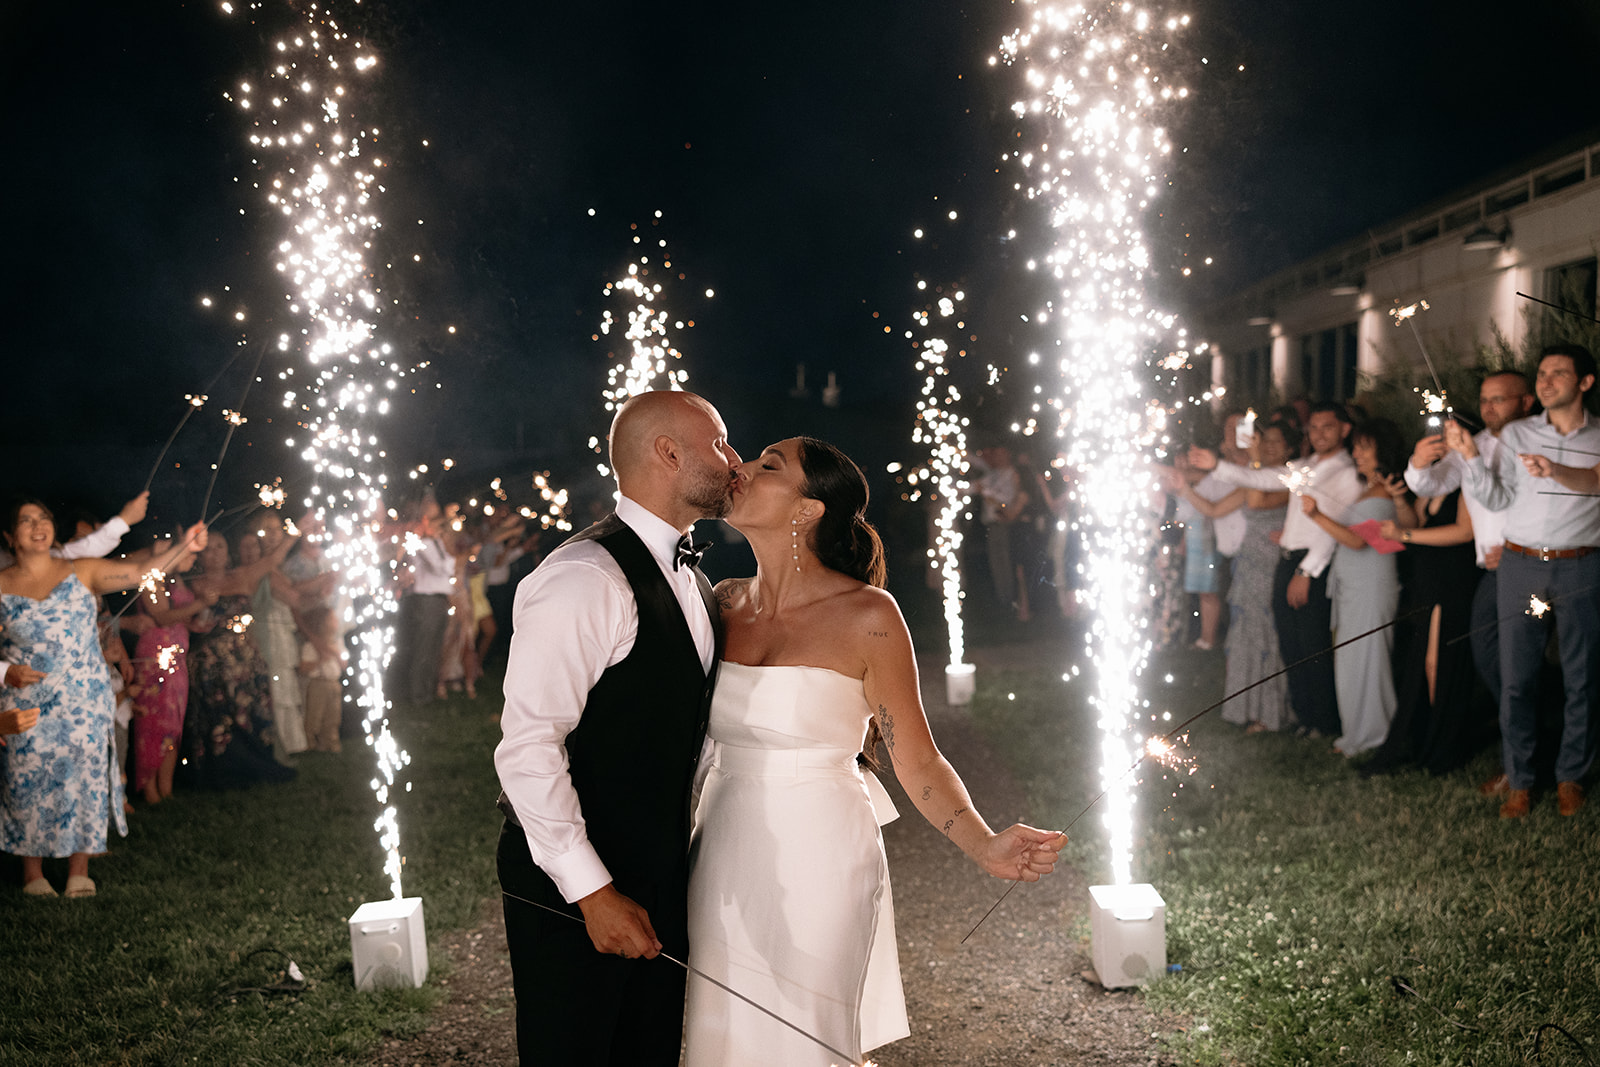 Bride and groom sparkler exit during wedding reception at Audrey's Farmhouse